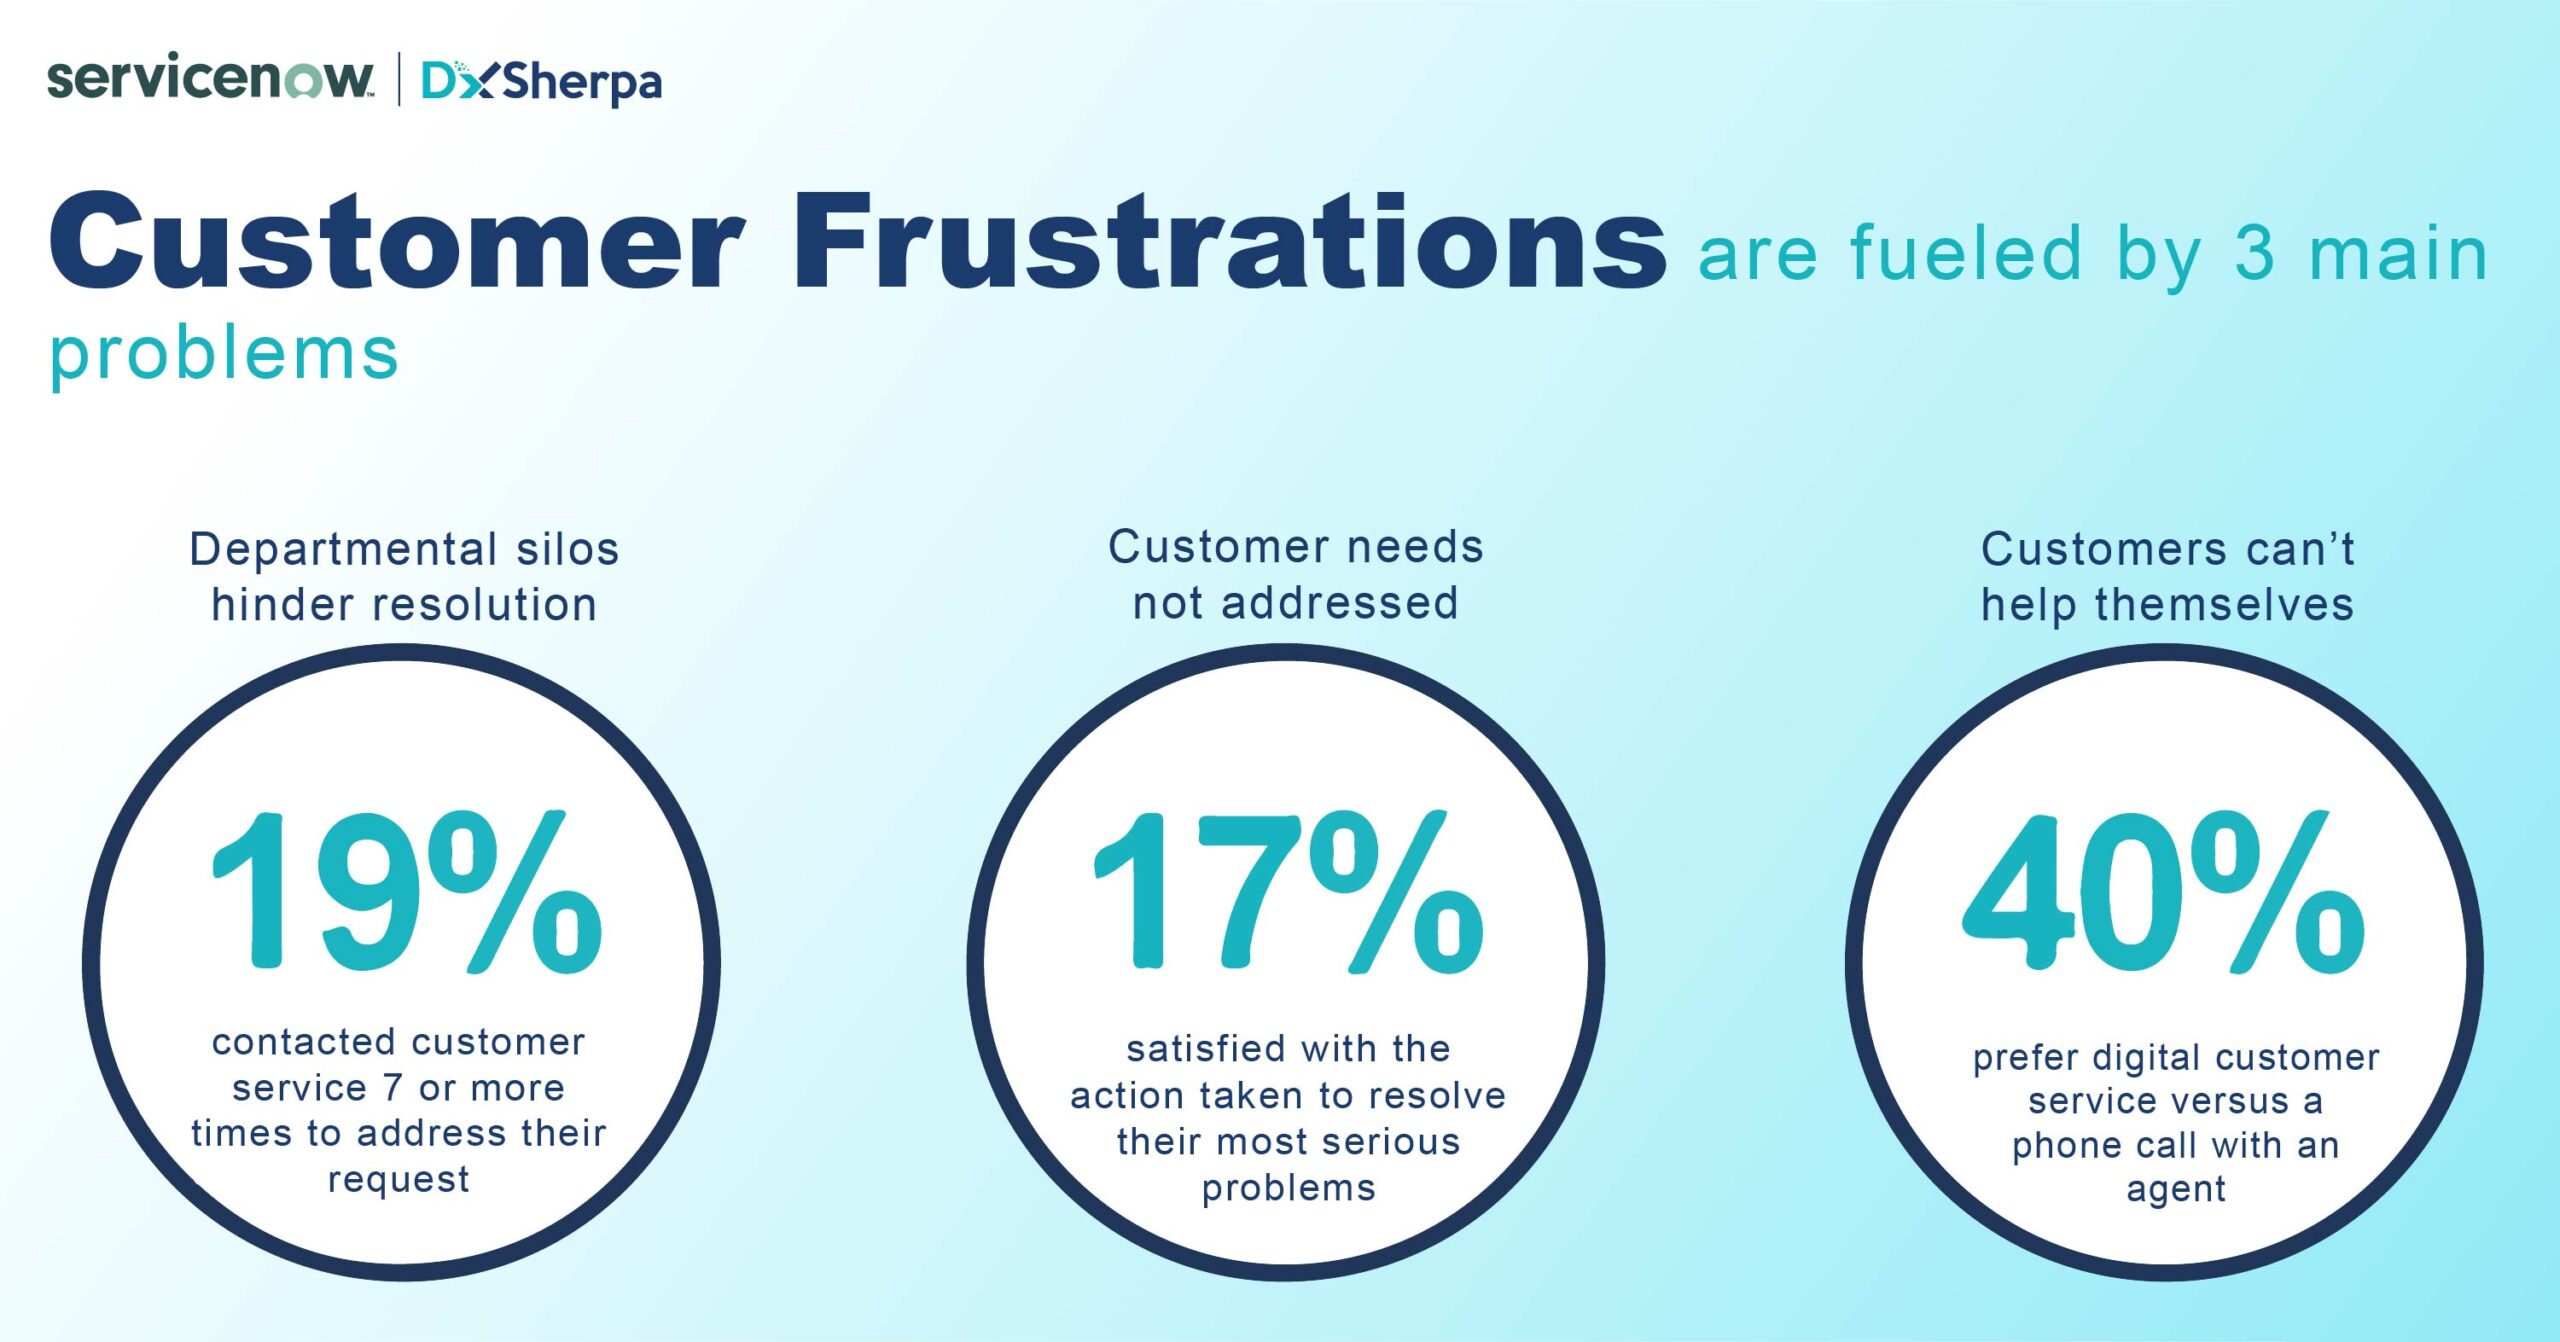 Customer Frustrations are fueled by 3 main problems